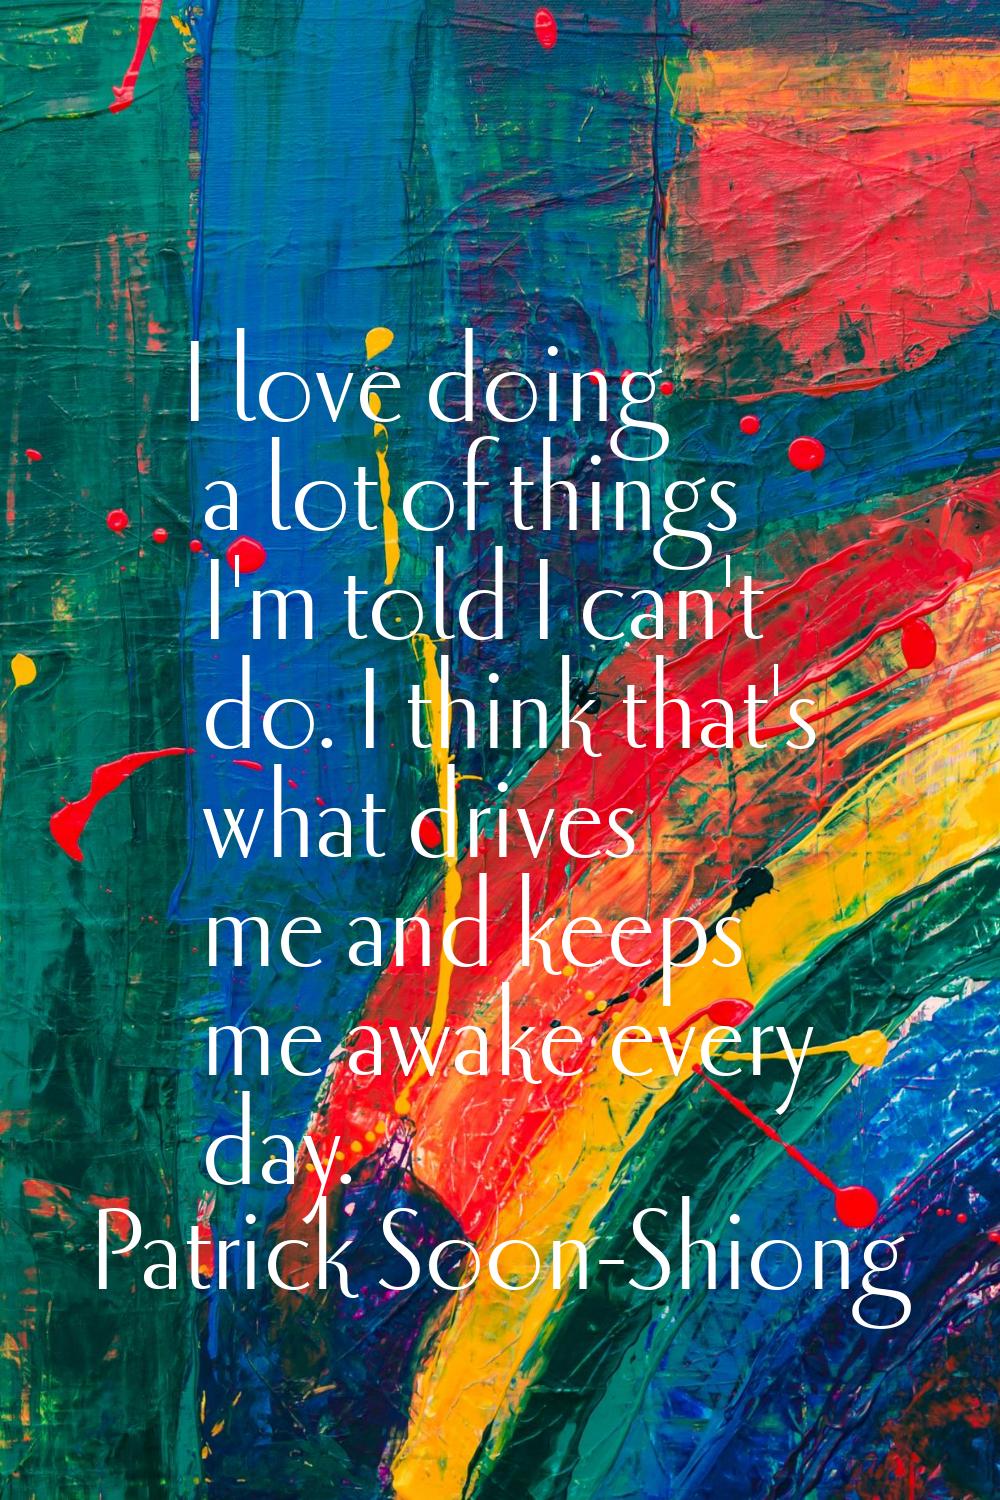 I love doing a lot of things I'm told I can't do. I think that's what drives me and keeps me awake 